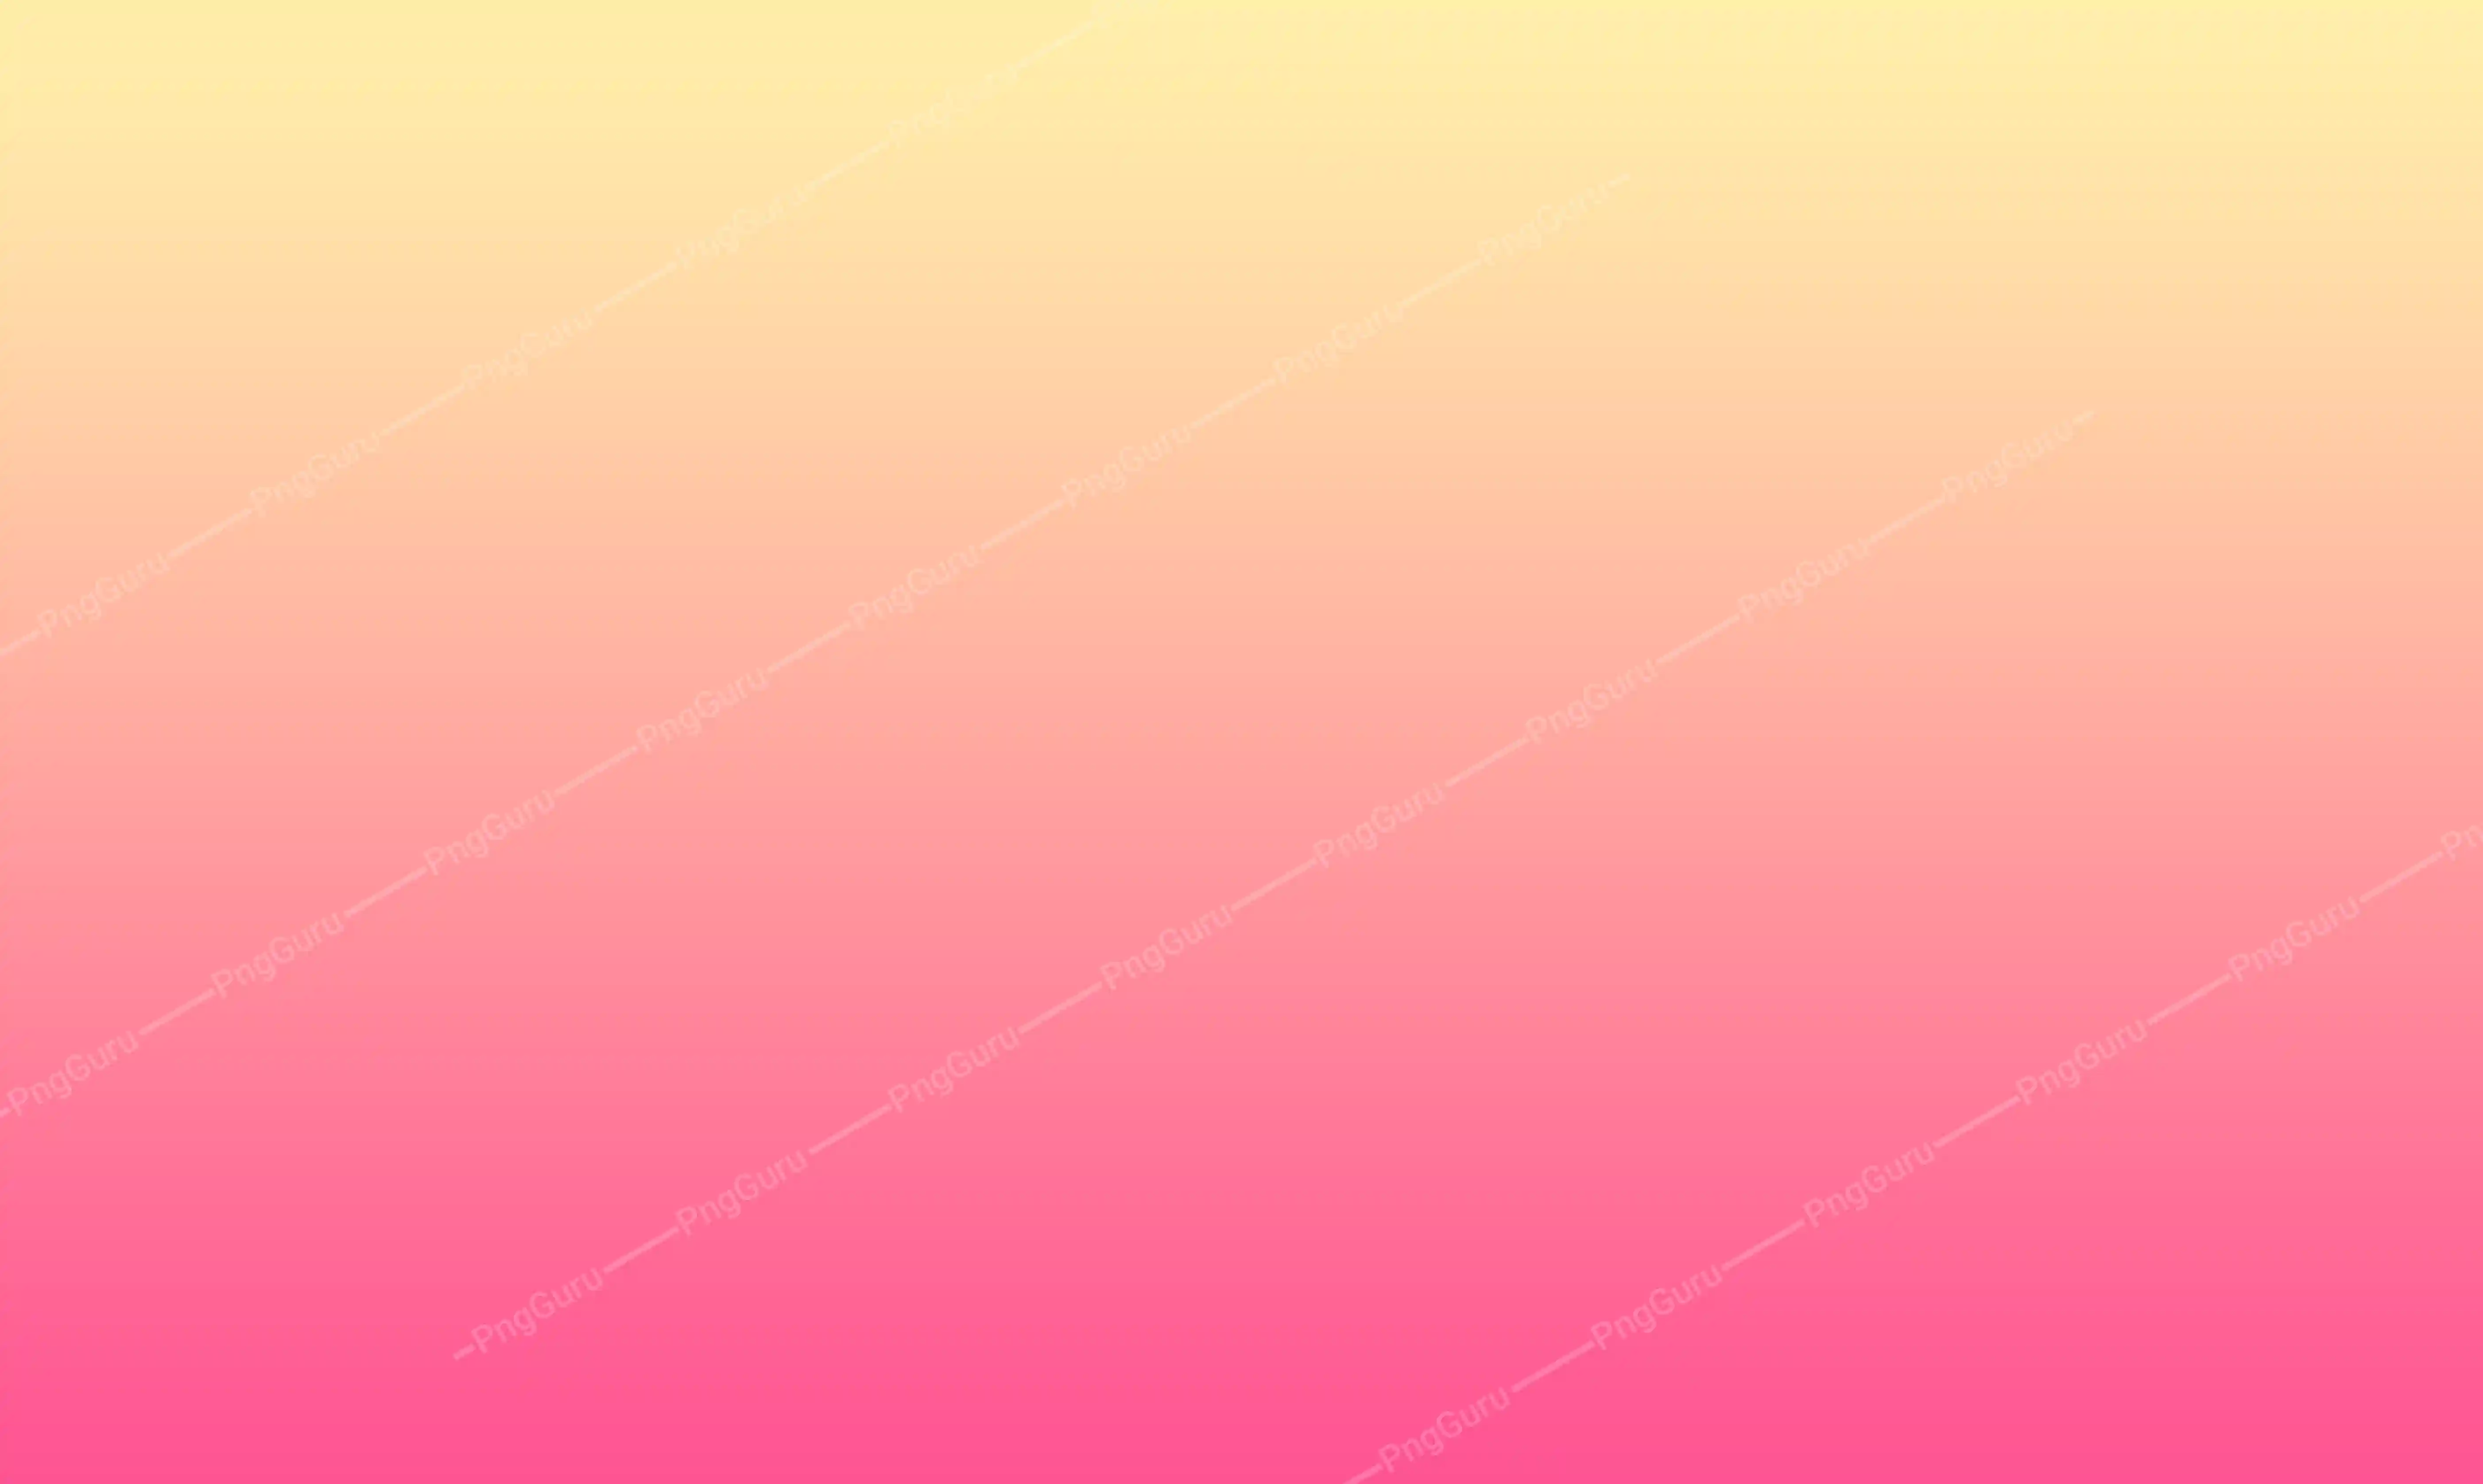 Cream and pink gradient high resolution background